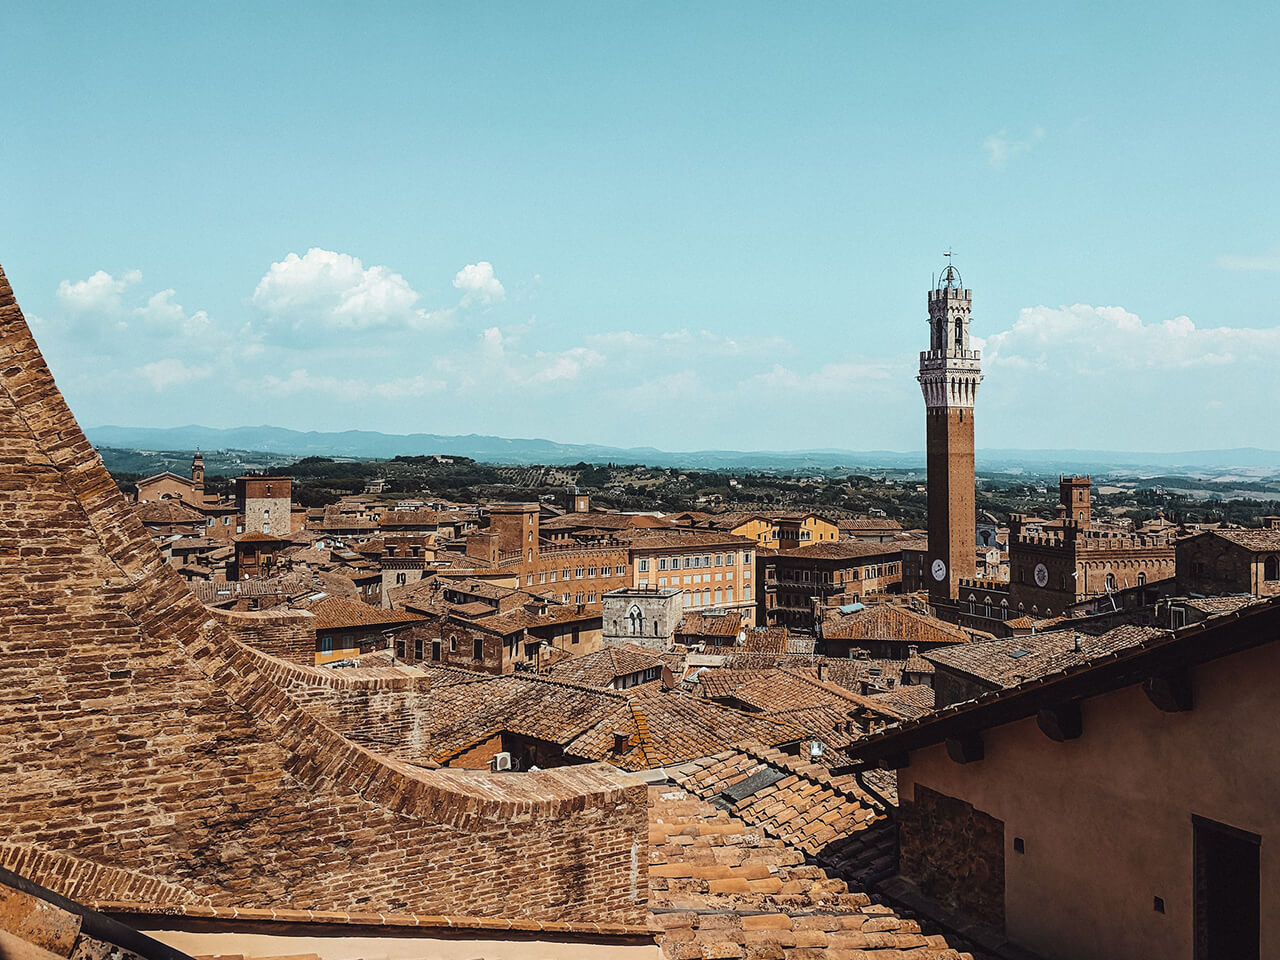 Visit Tuscany in winter for fewer crowds, affordable prices, and enjoyable thermal baths. Don't miss out on festivals and events in different seasons."